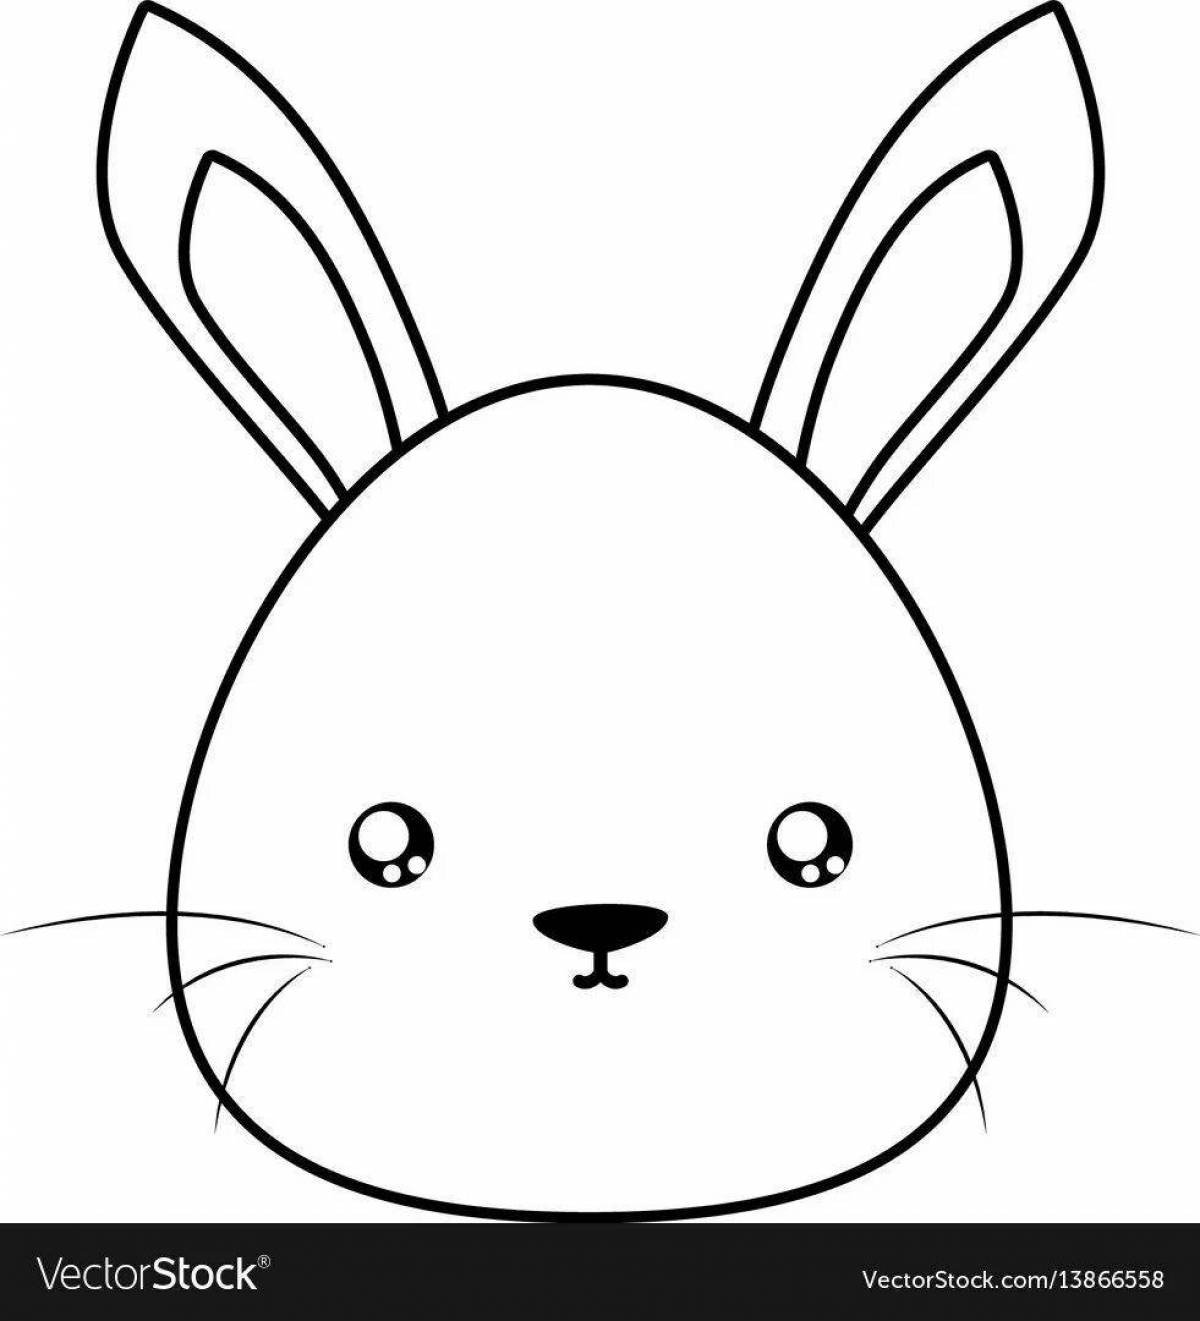 Colourful hare head coloring page